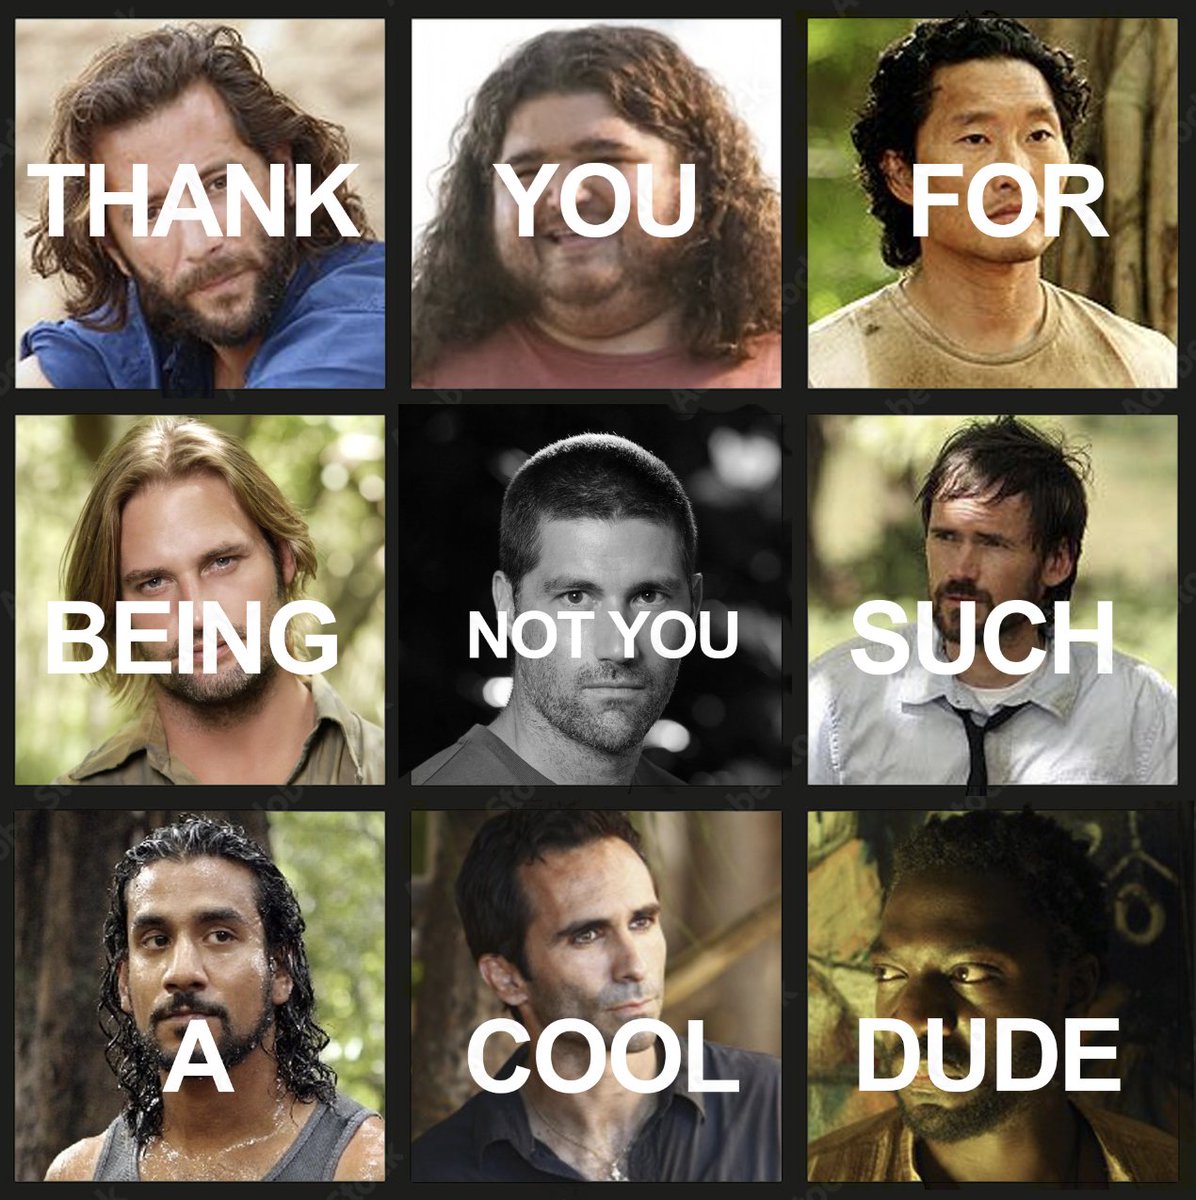 this one goes out to the legendary amount of Cool Dudes on LOST